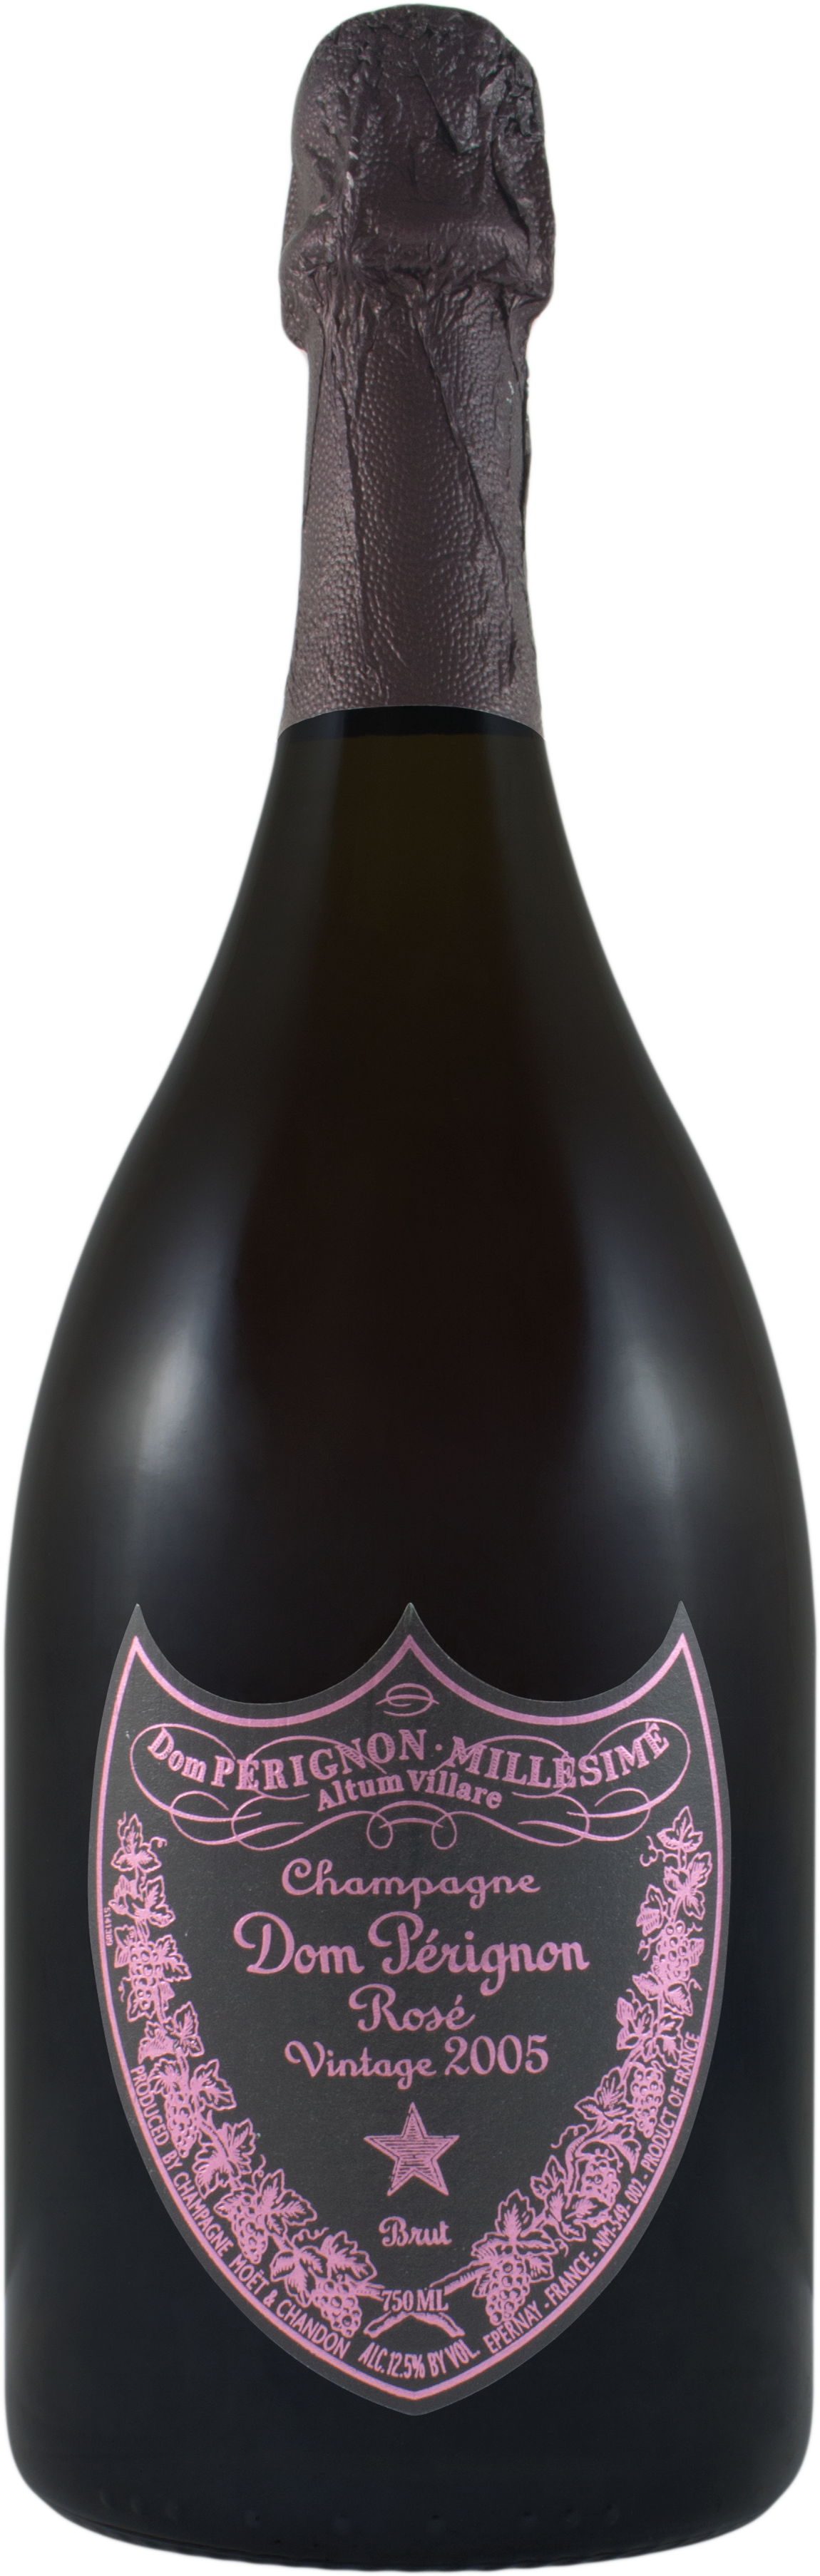 A Black Bottle With Pink Logo